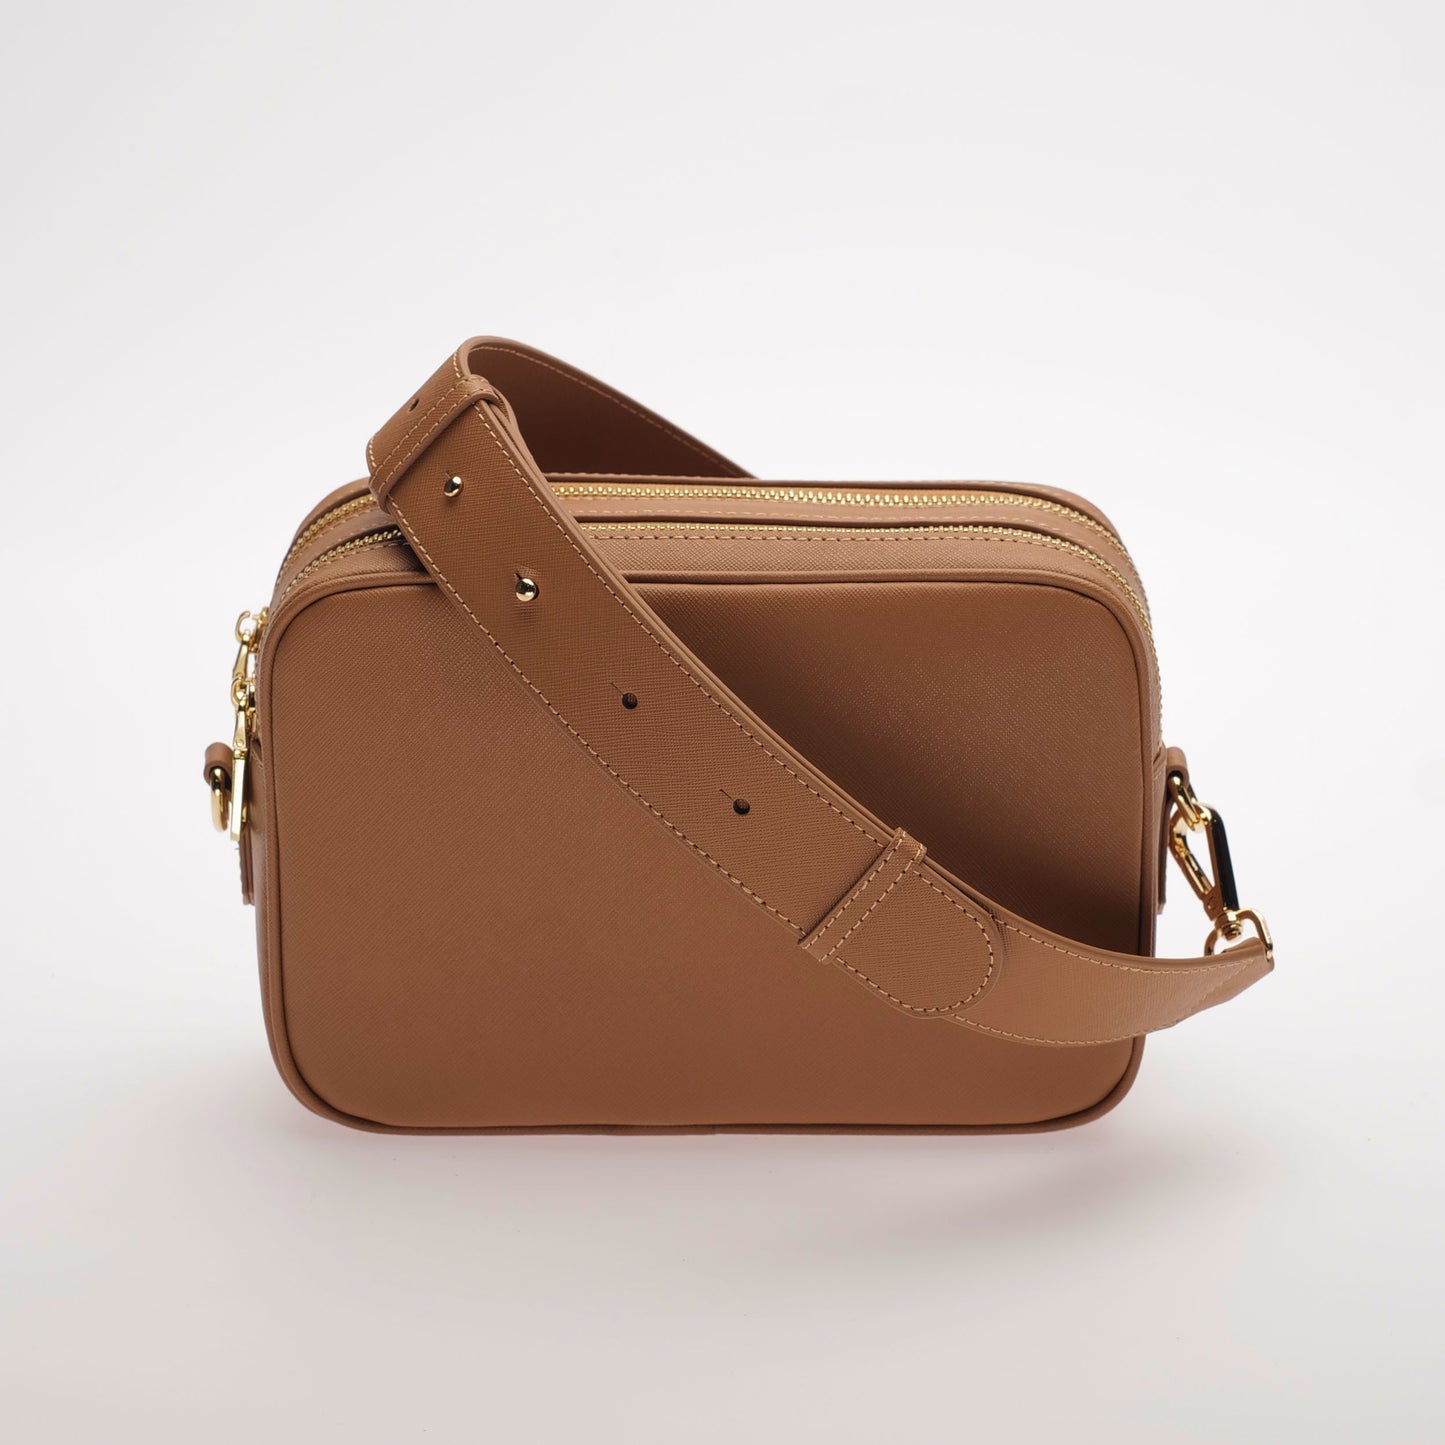 The James Saffiano Leather Crossbody Bag in Dusky Rose Tan by Swoon London